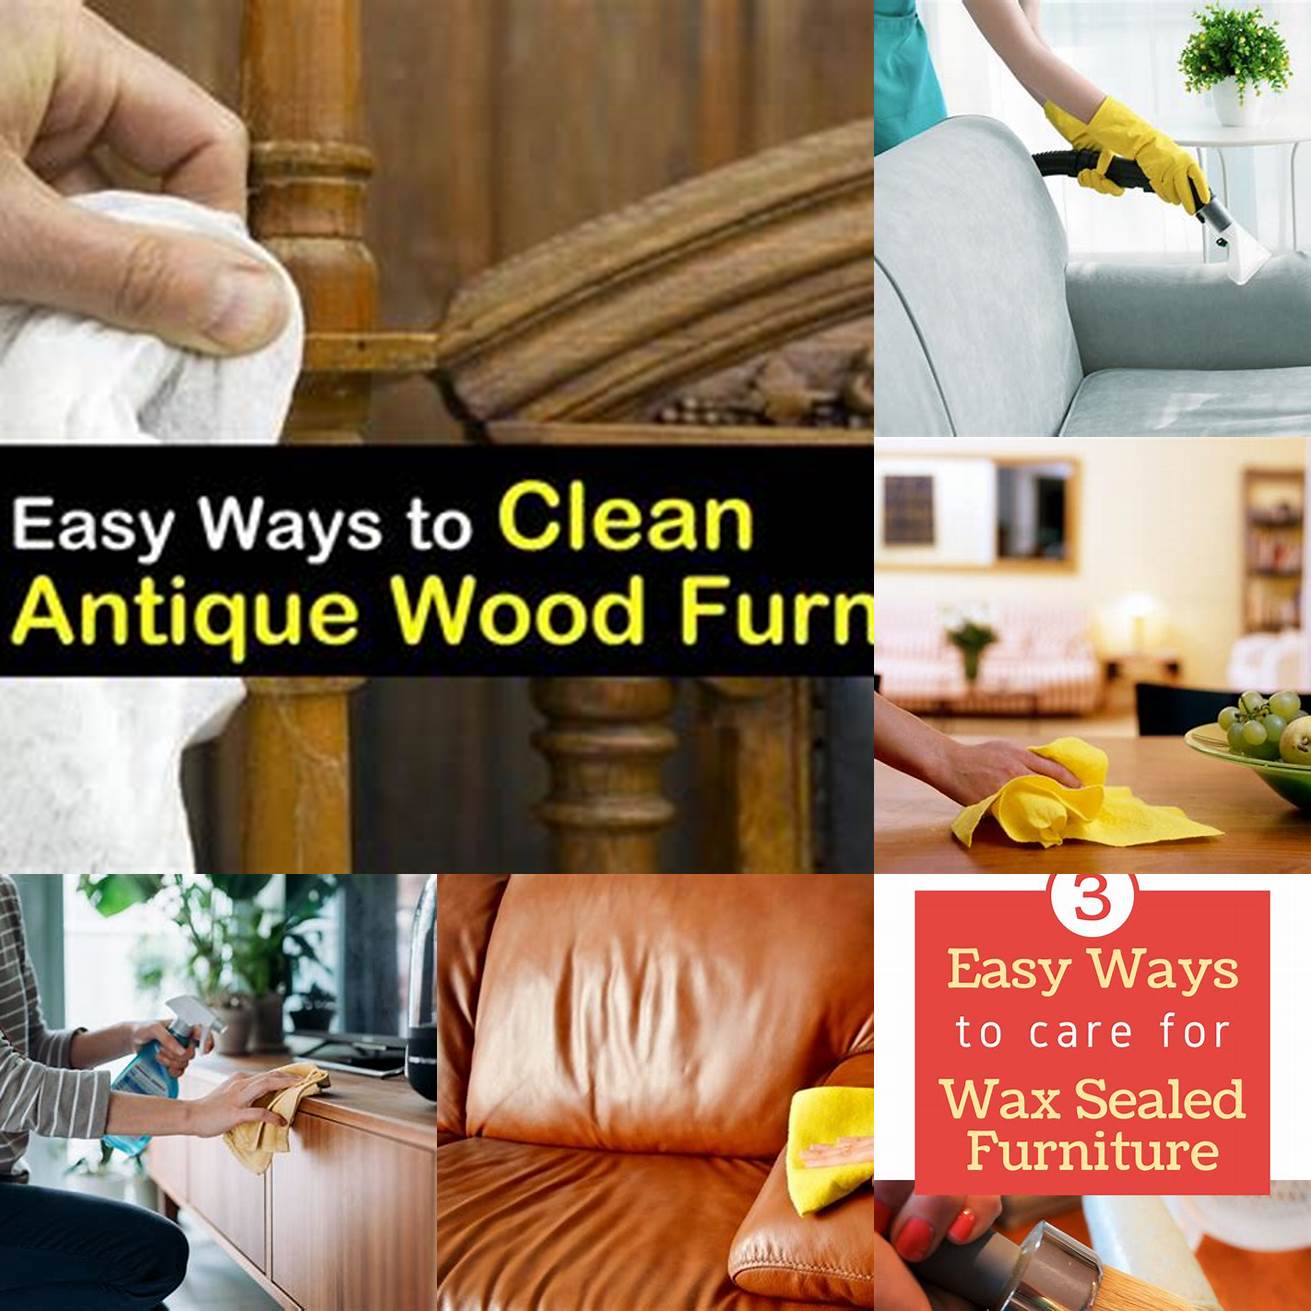 Clean and seal the furniture regularly